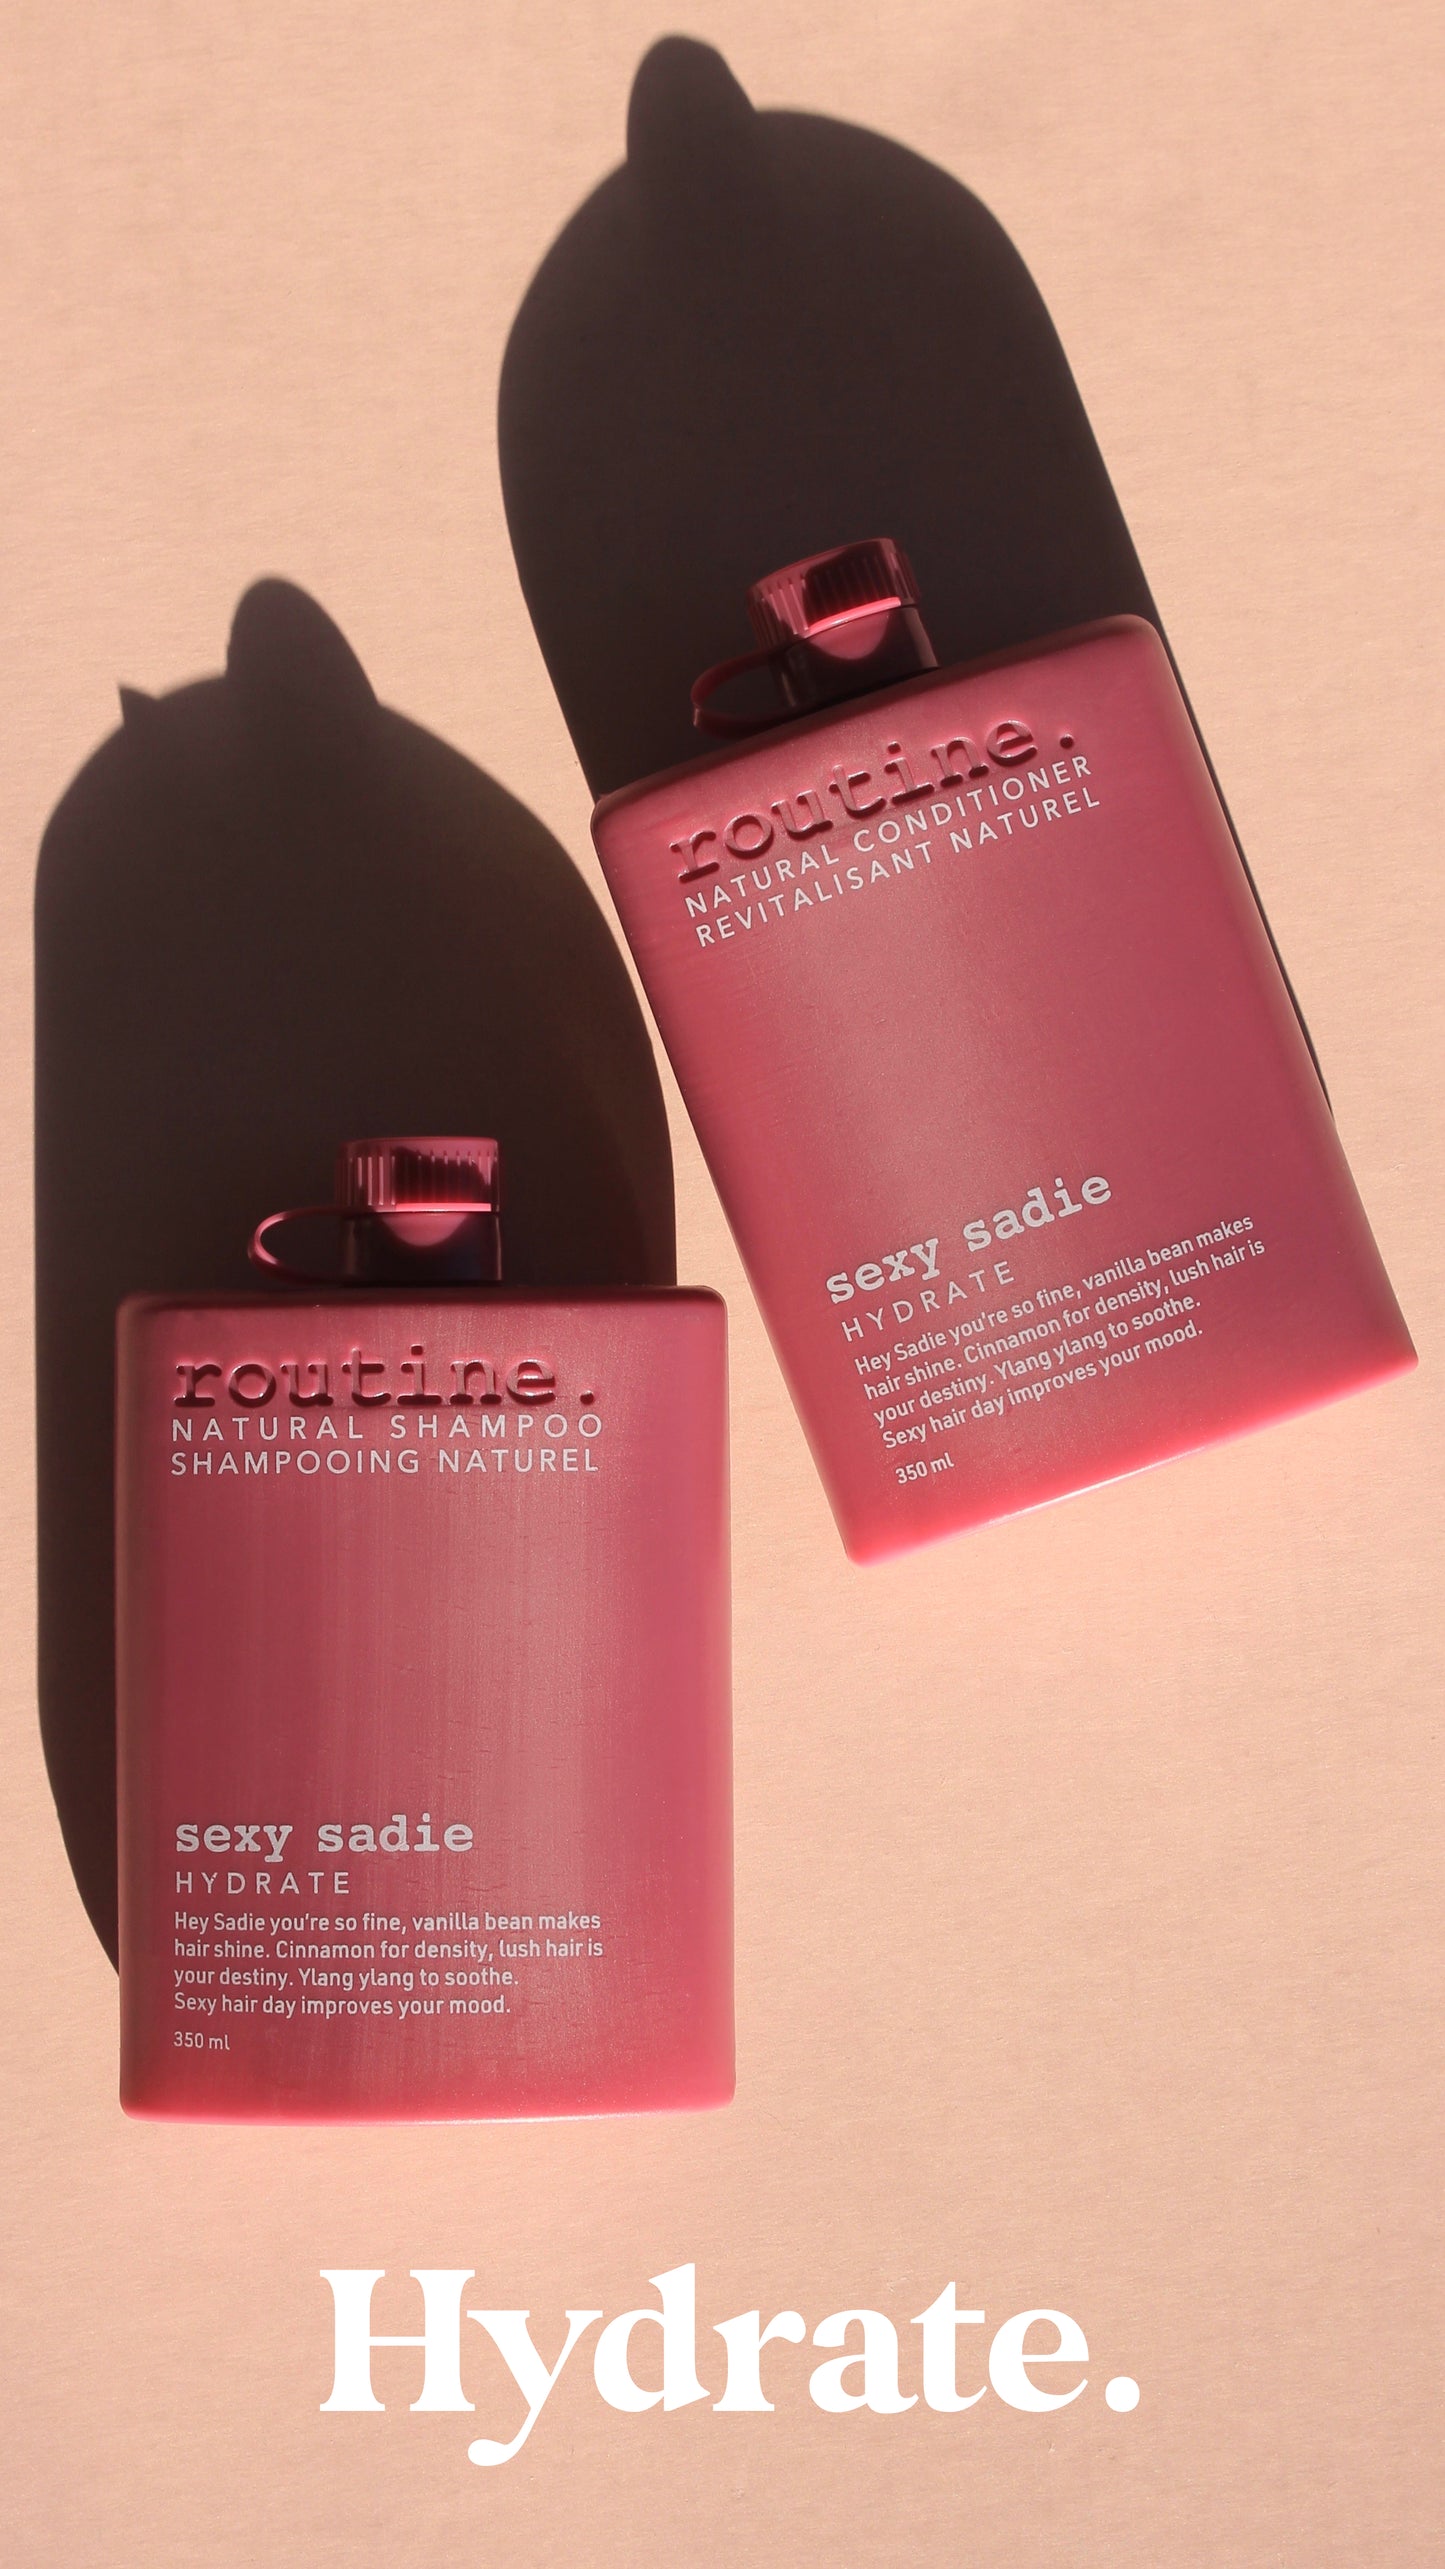 Routine - Natural Shampoo & Conditioner - called Sexy Sadie - Hydrating for your hair - magenta sleek bottle with white writing and pink shadow back ground